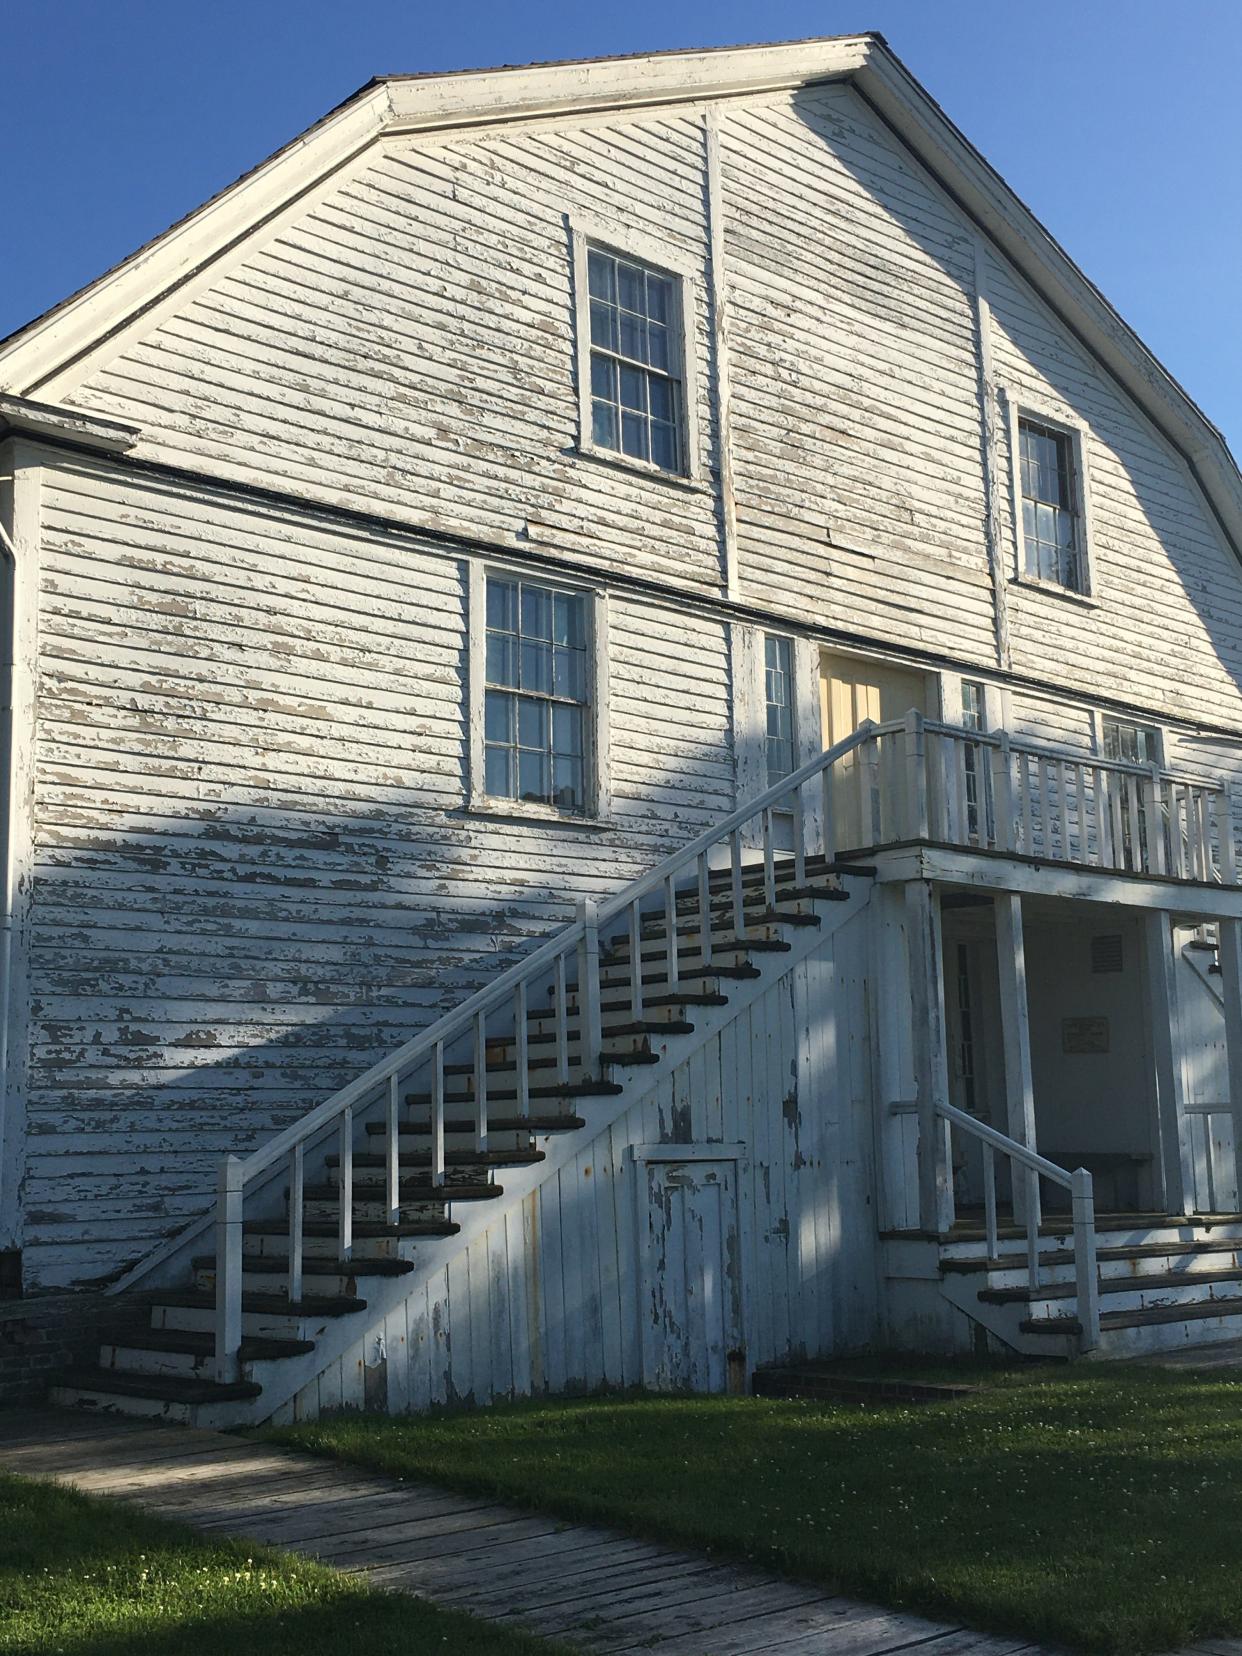 The Colony Church in Bishop Hill, built by Swedish immigrants. A resident is trying to call attention to dilapidated state-owned buildings in the historic village.